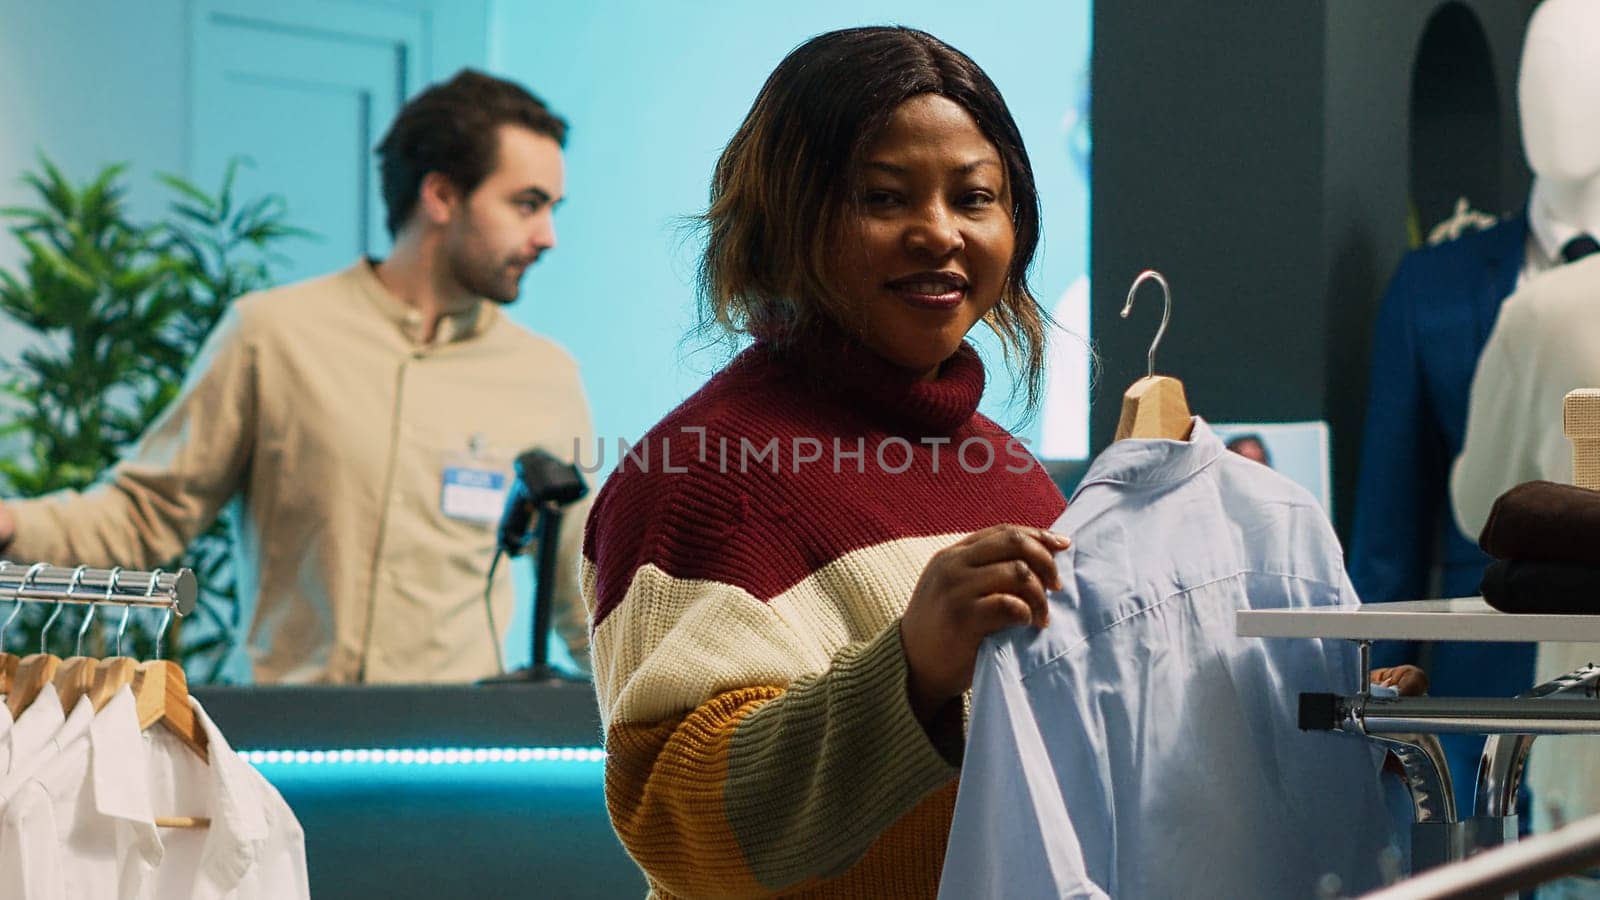 Female client looking at clothes on hangers and racks, examining merchandise in clothing store. Young woman buying fashionable casual wear on discount, commercial activity in shopping center.